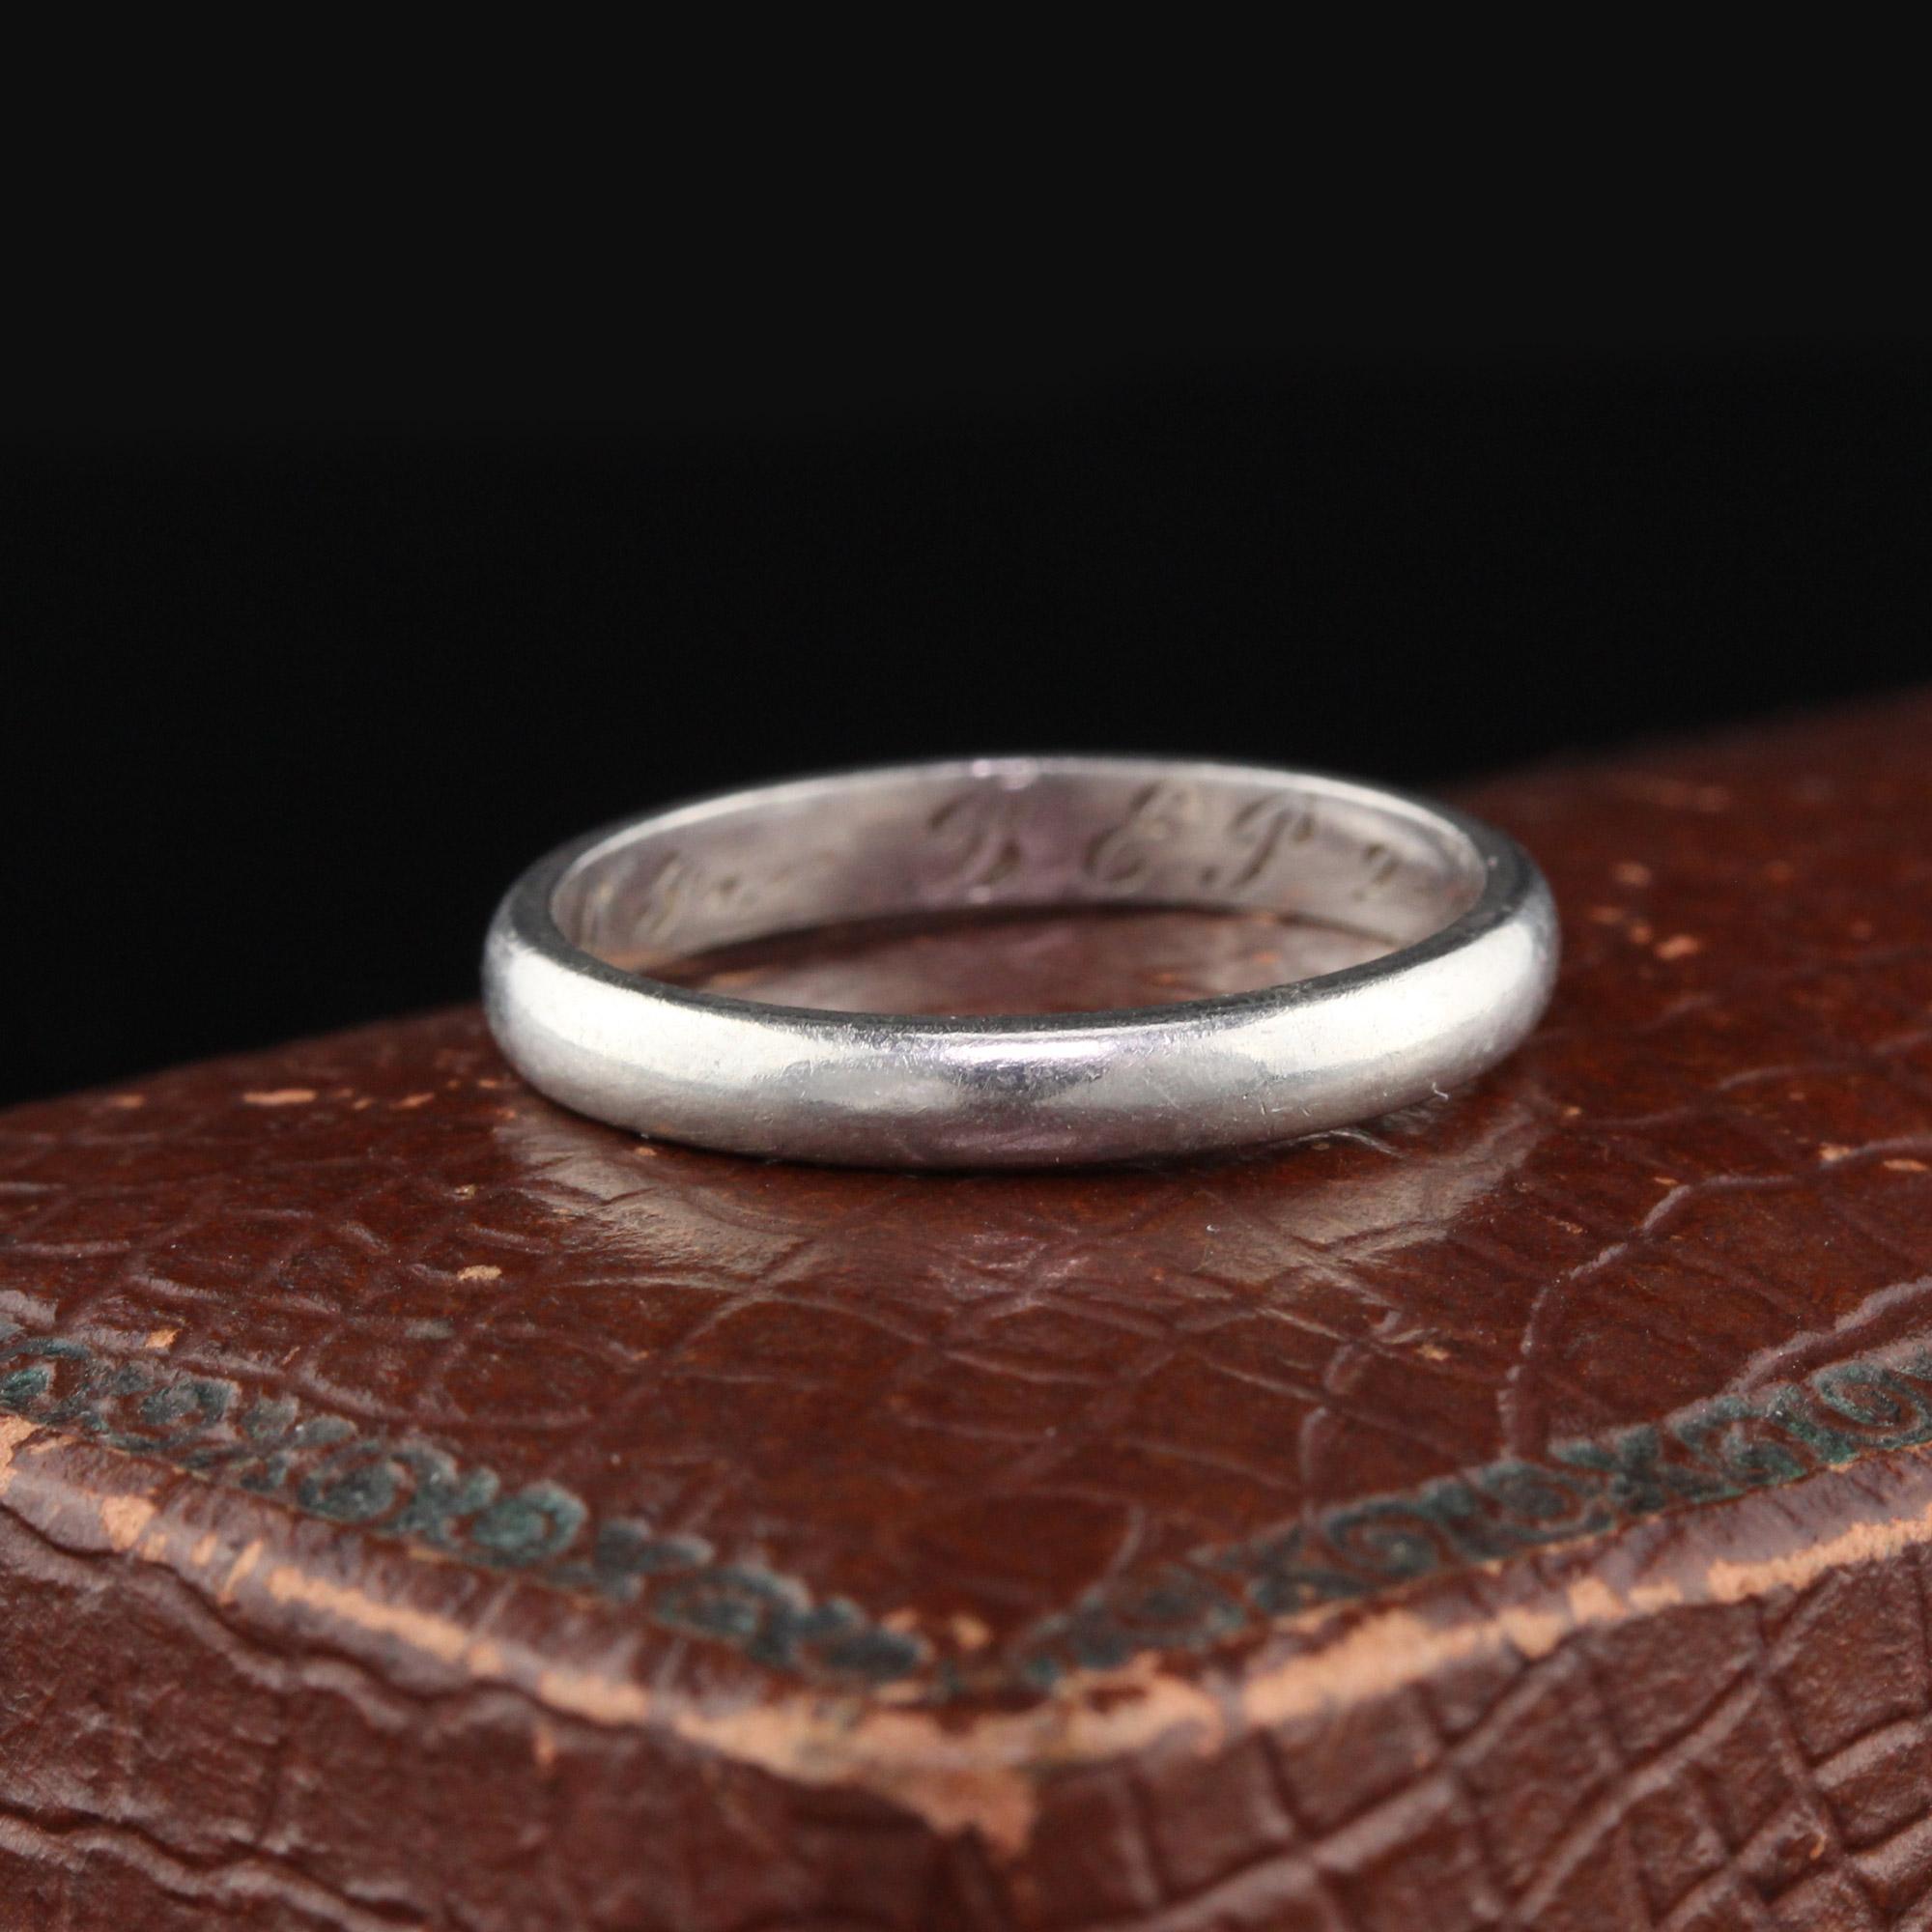 This is a classic simple Vintage Platinum Wedding Band Dated 9/13/58 with engraved initials.

#R0205

Metal: Platinum

Weight: 3.1 Grams

Ring Size: 5

This ring can be sized for a $30 fee

*Please note - we cannot accept returns on sized